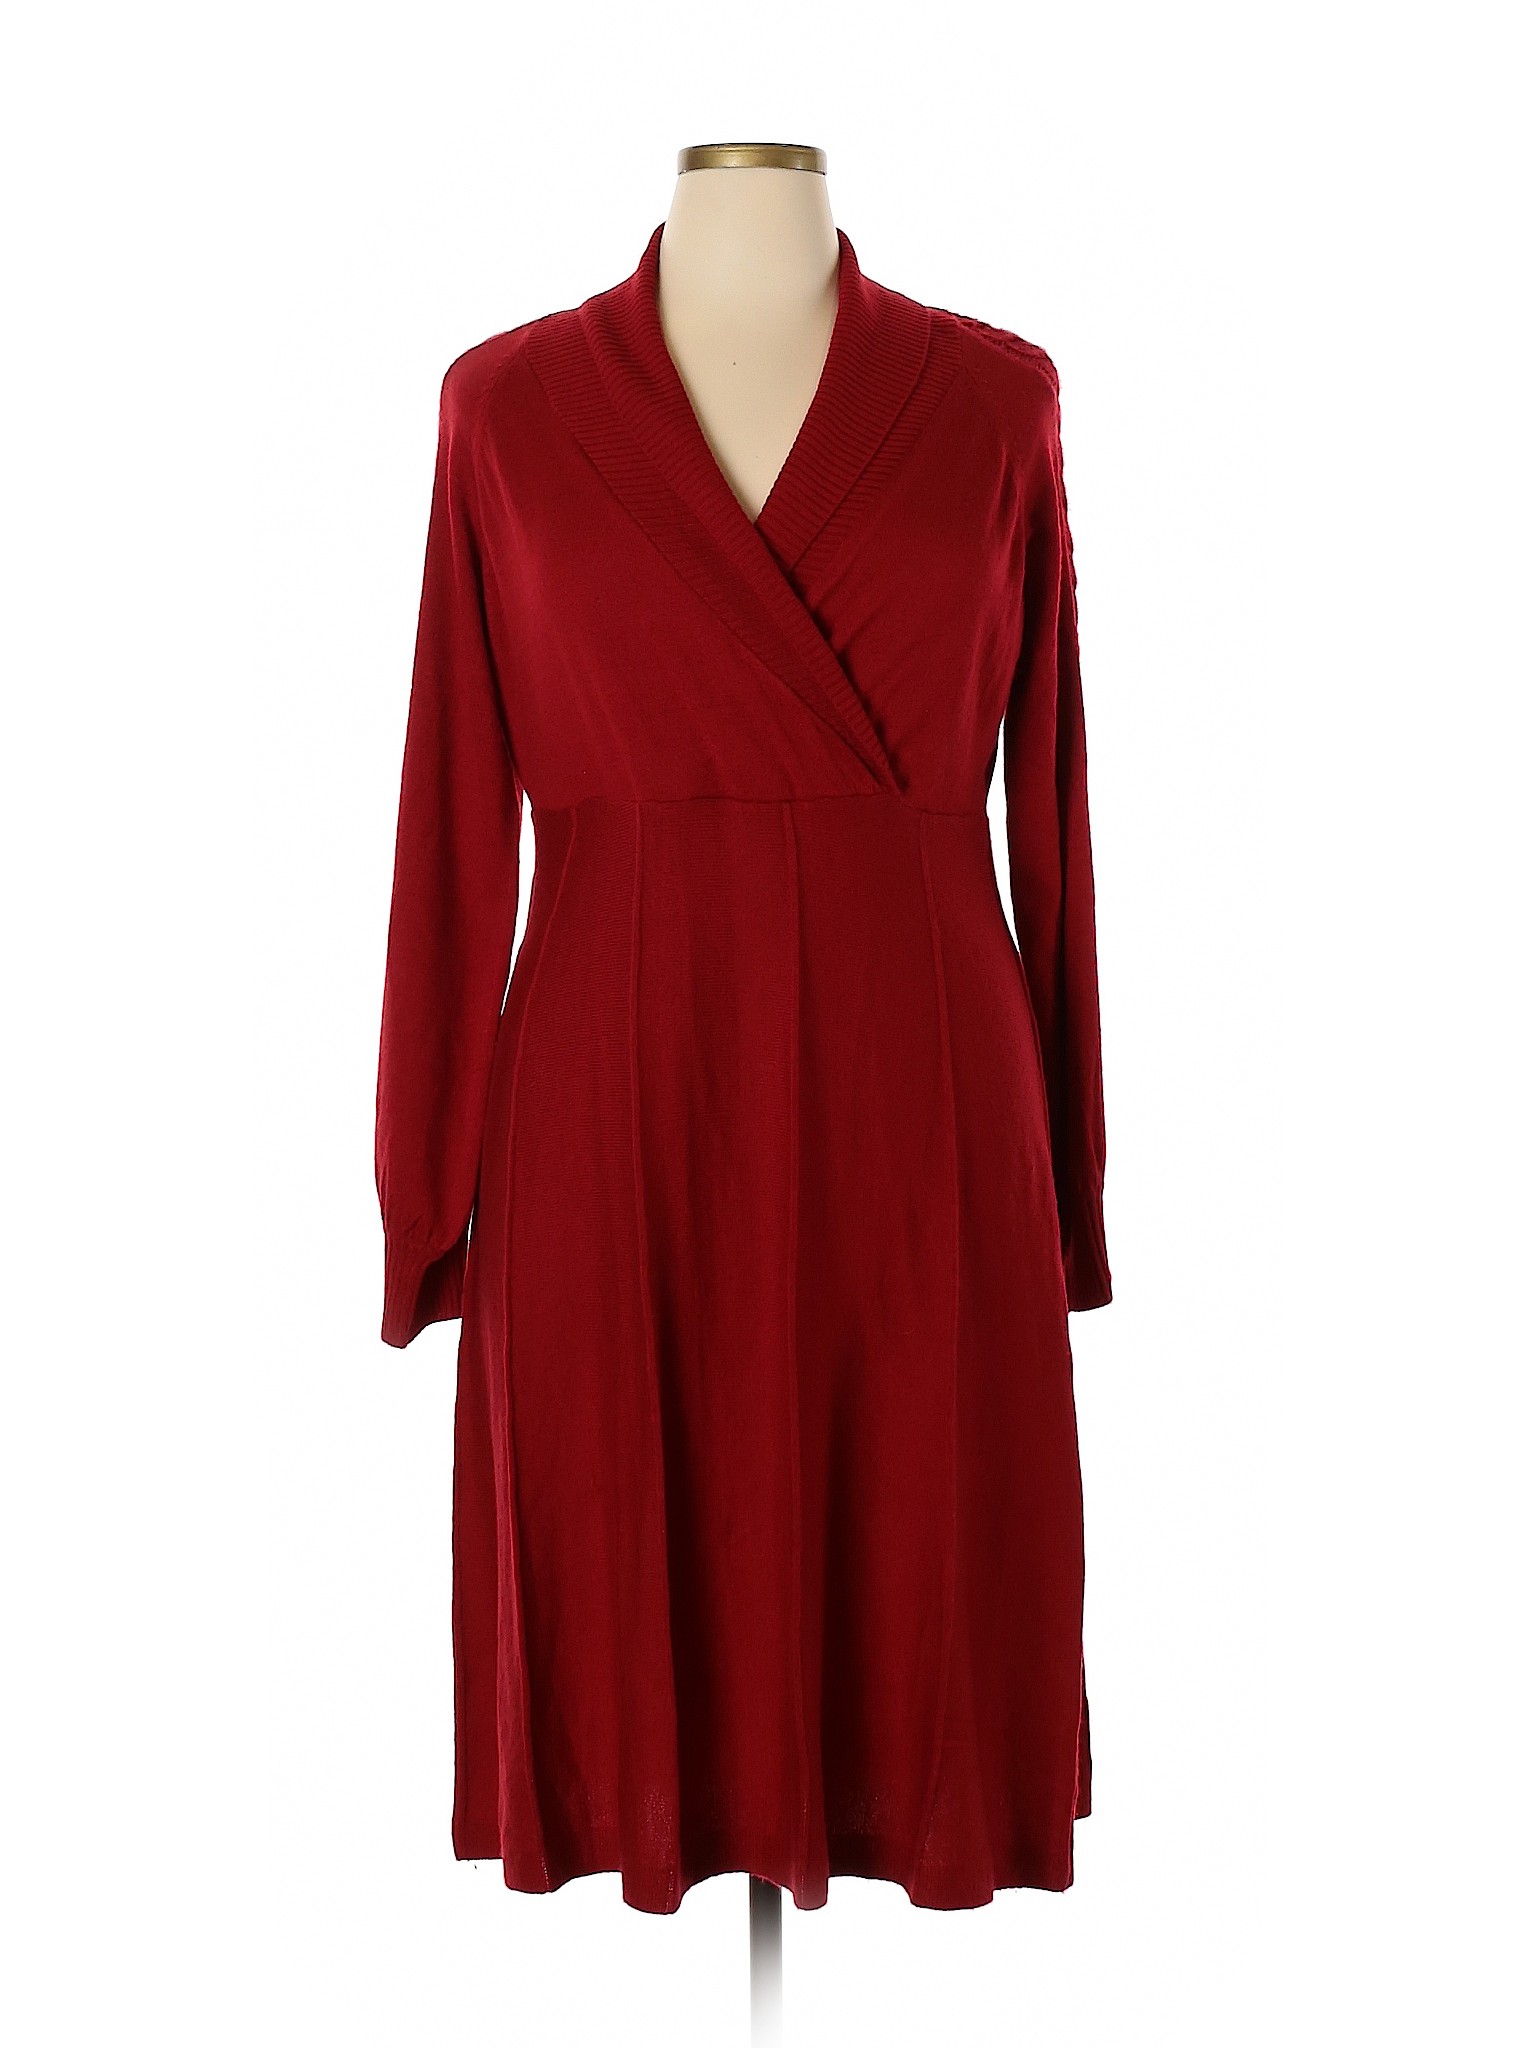 DressBarn 100% Acrylic Solid Red Casual Dress Size 1X (Plus) - 64% off ...